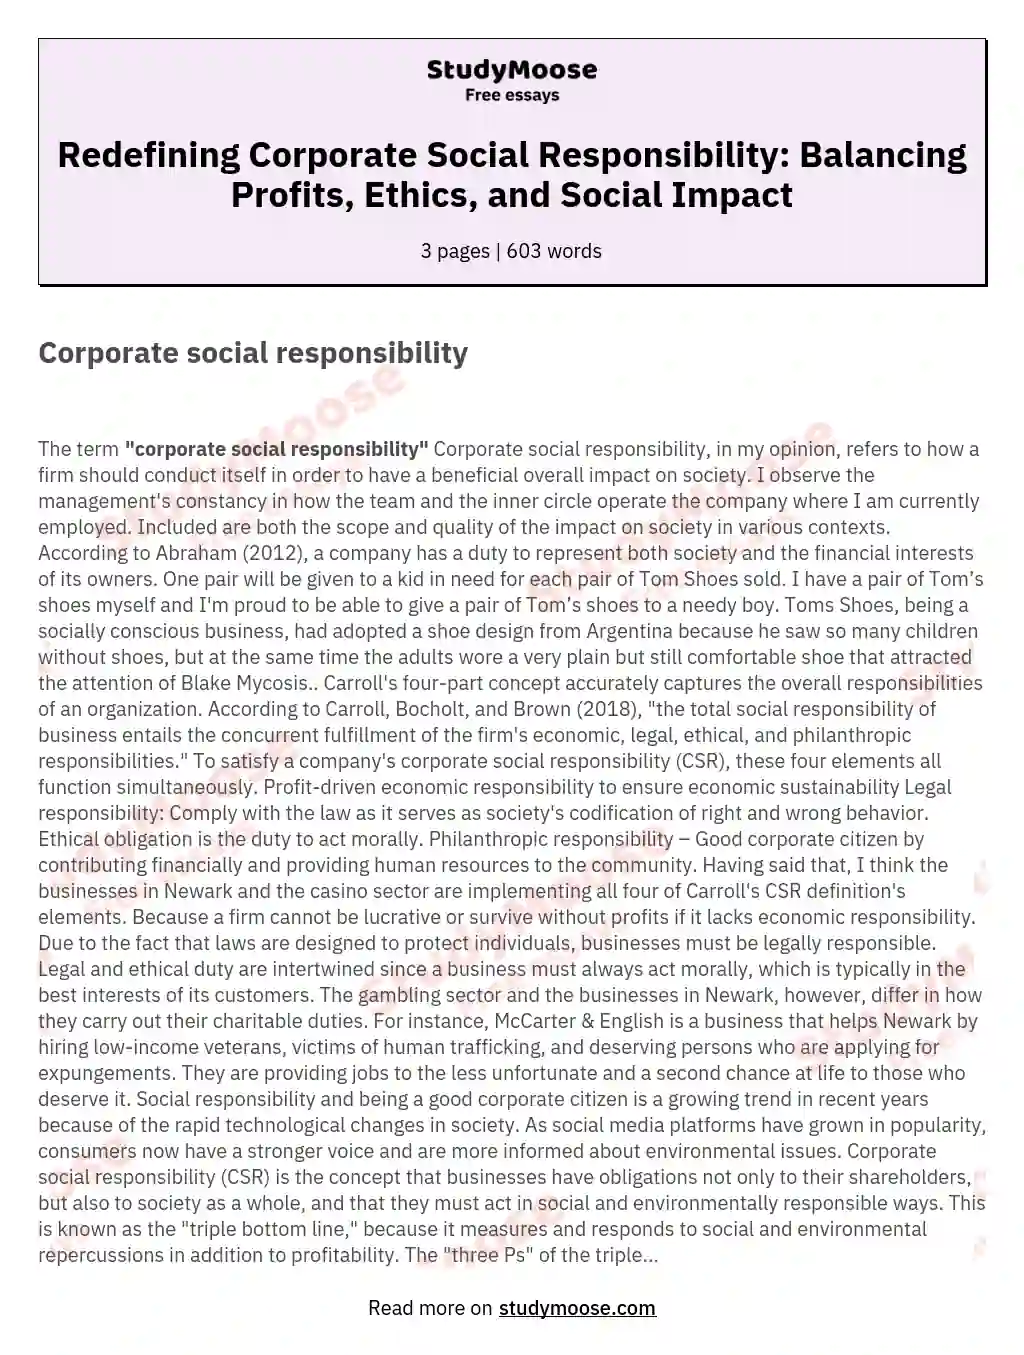 Redefining Corporate Social Responsibility: Balancing Profits, Ethics, and Social Impact essay